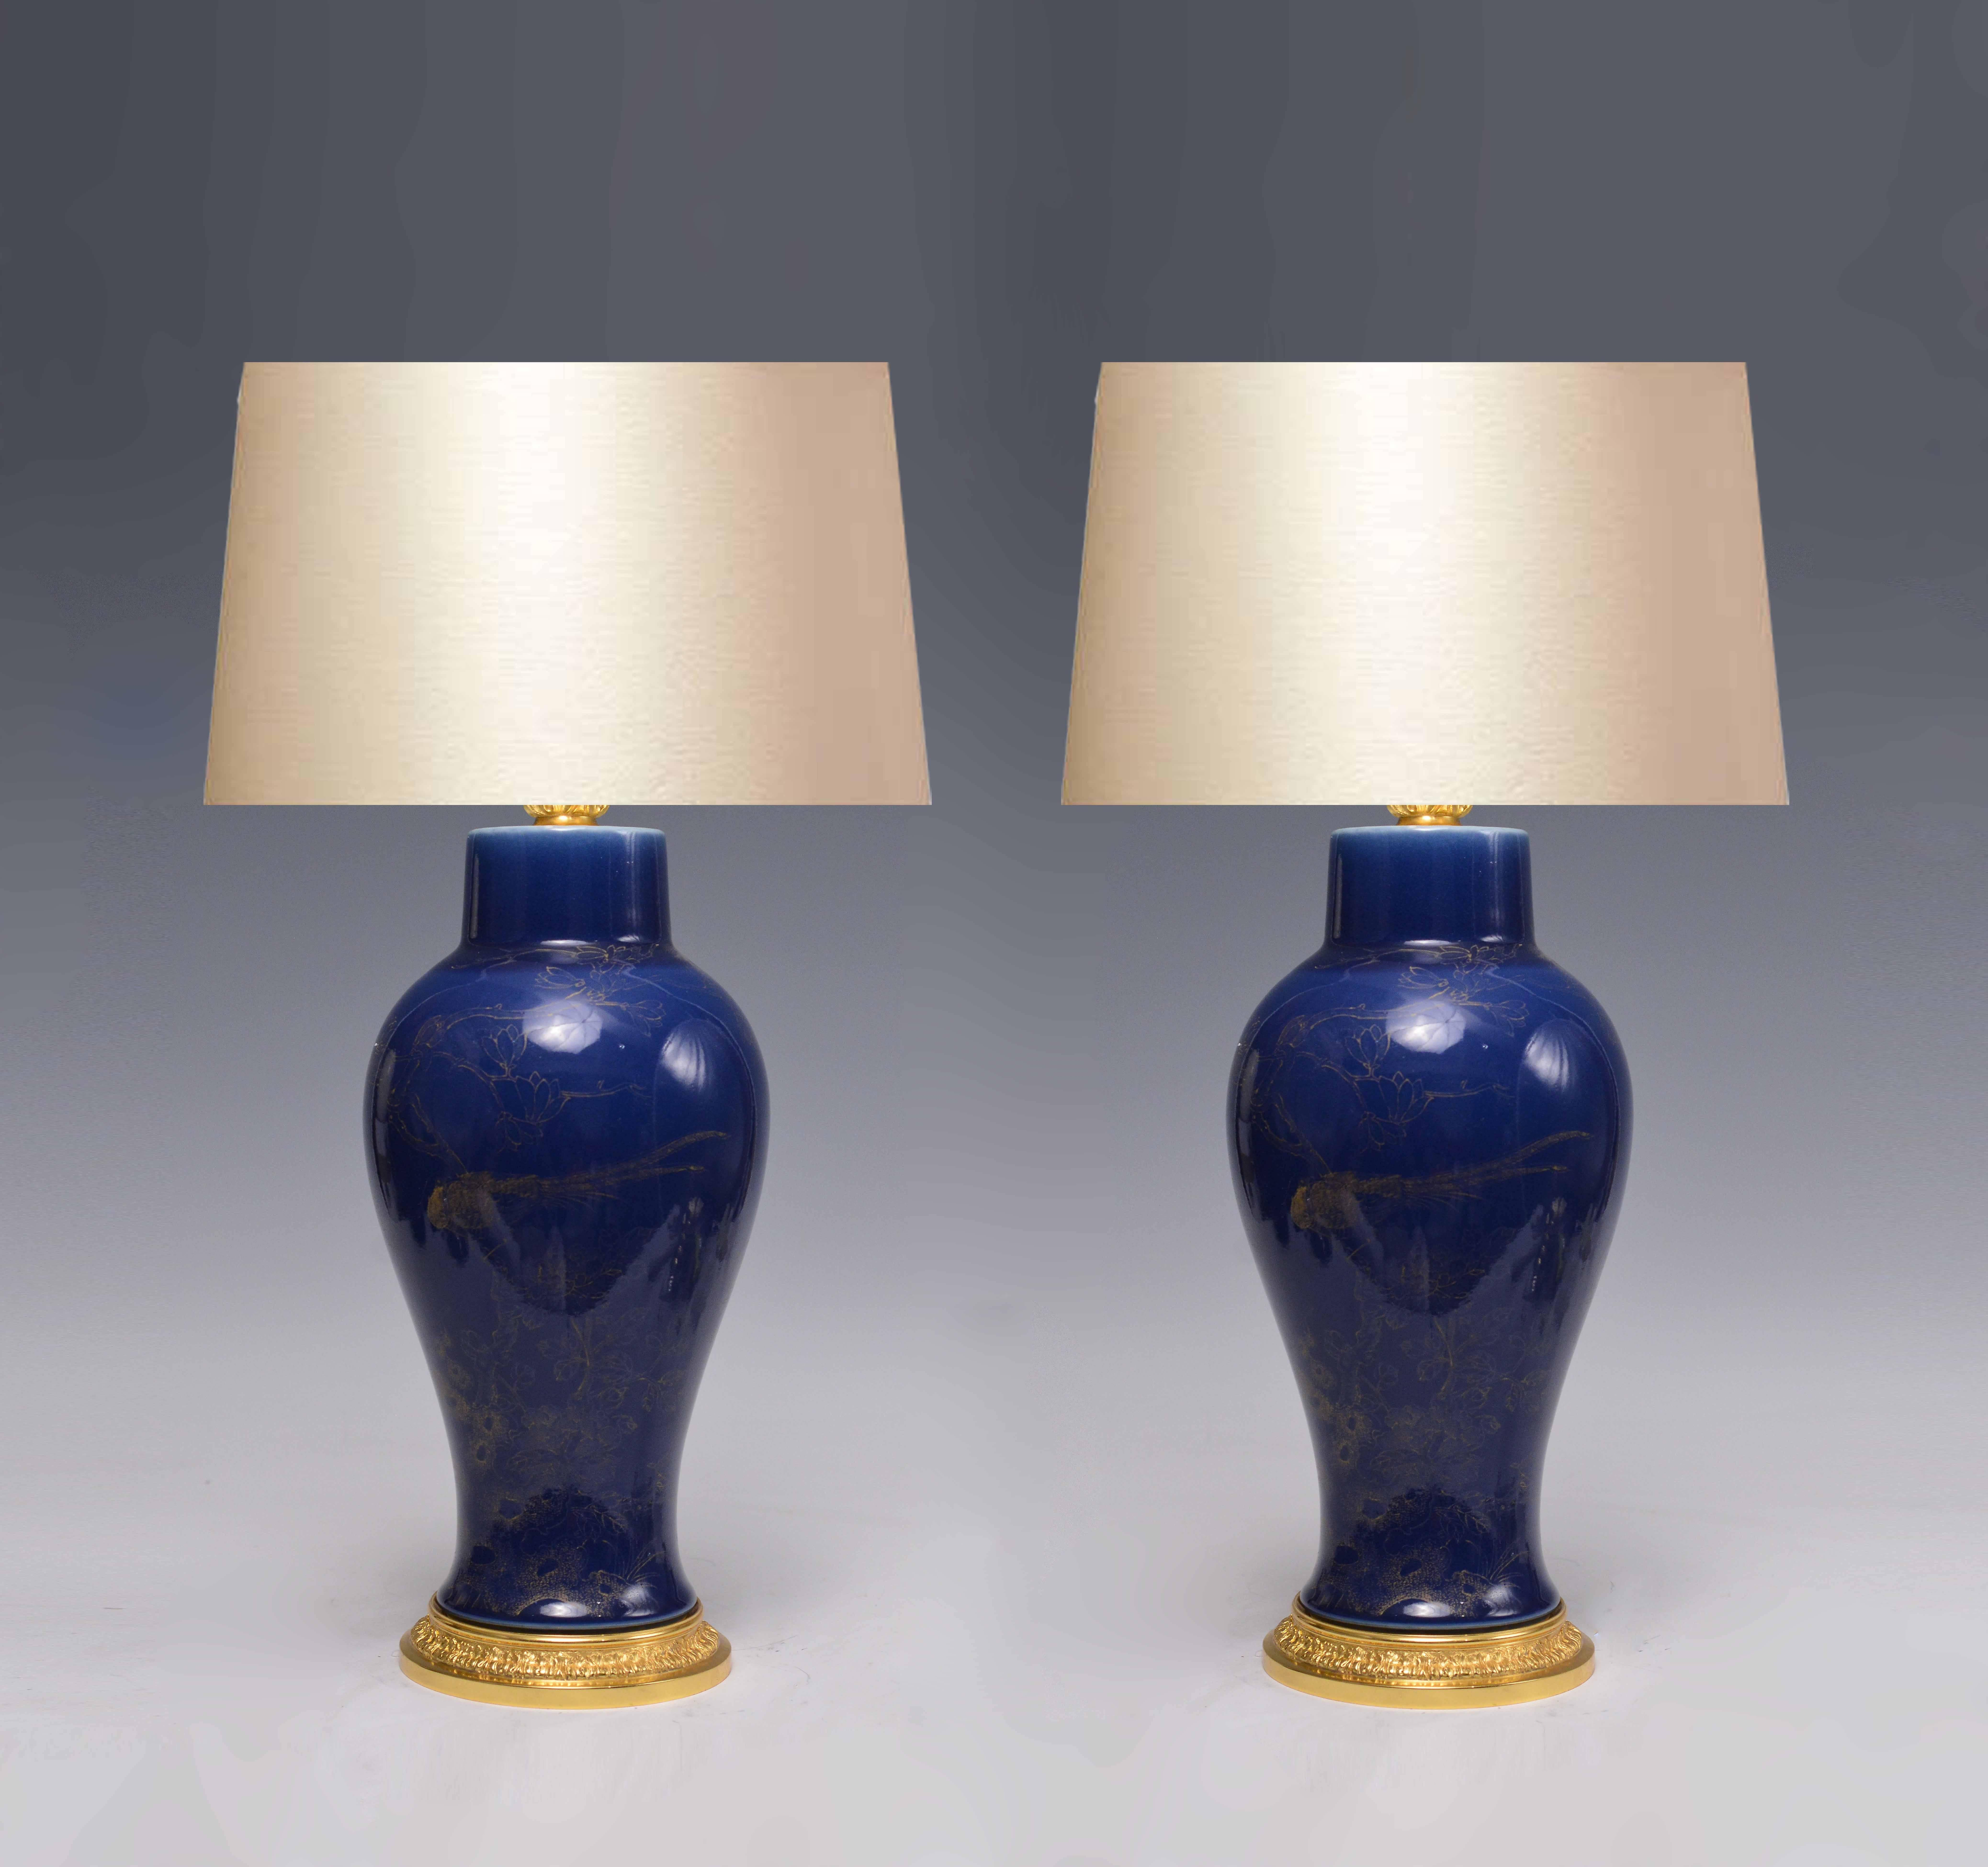 A pair of dark blue porcelain vase lamps in flower blossom and birds decorations with gilt brass bases.
To the porcelain vase: 17.5 in H.
(Lampshade not included)